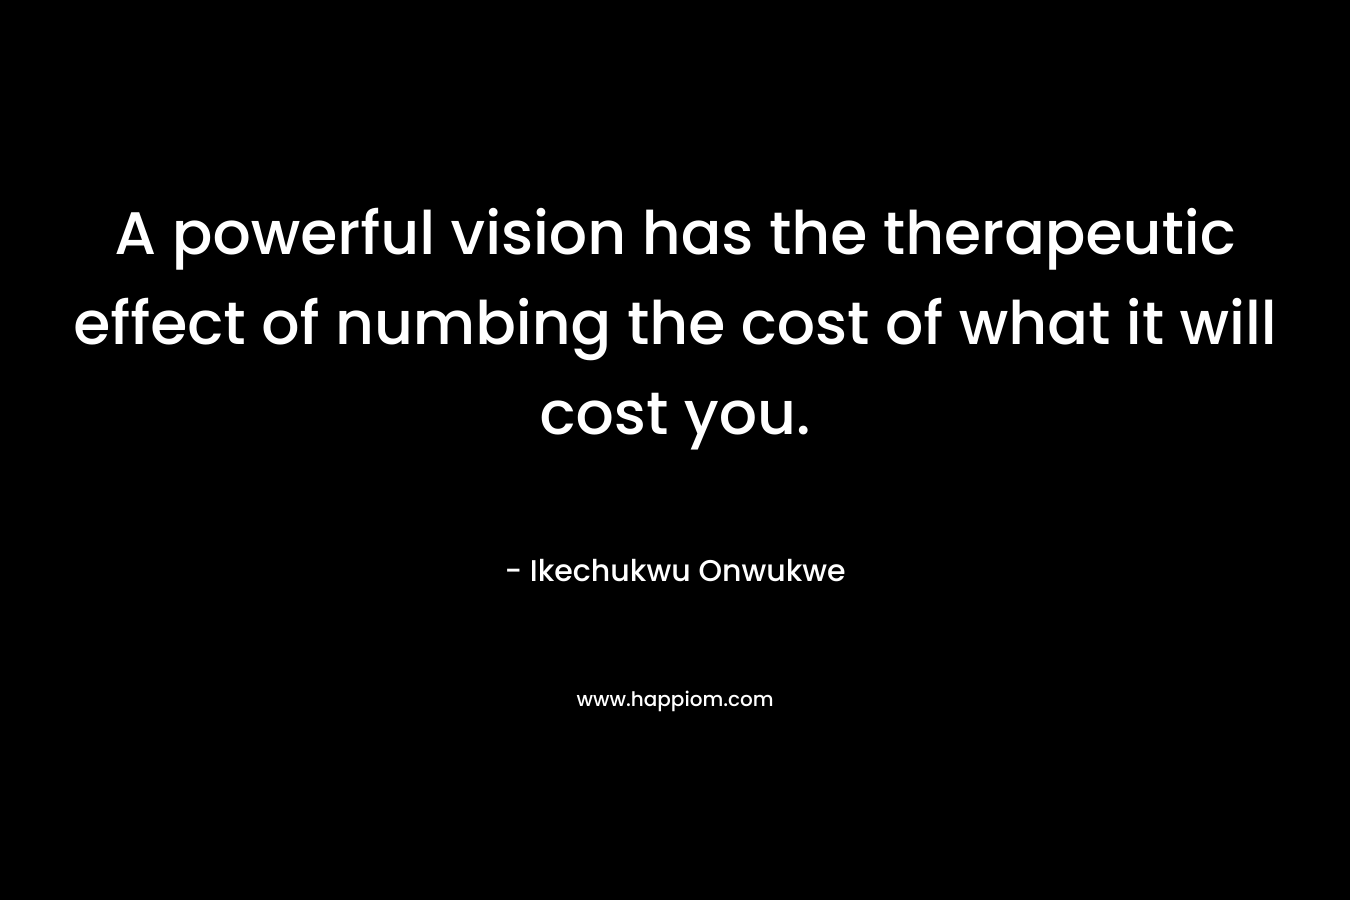 A powerful vision has the therapeutic effect of numbing the cost of what it will cost you.